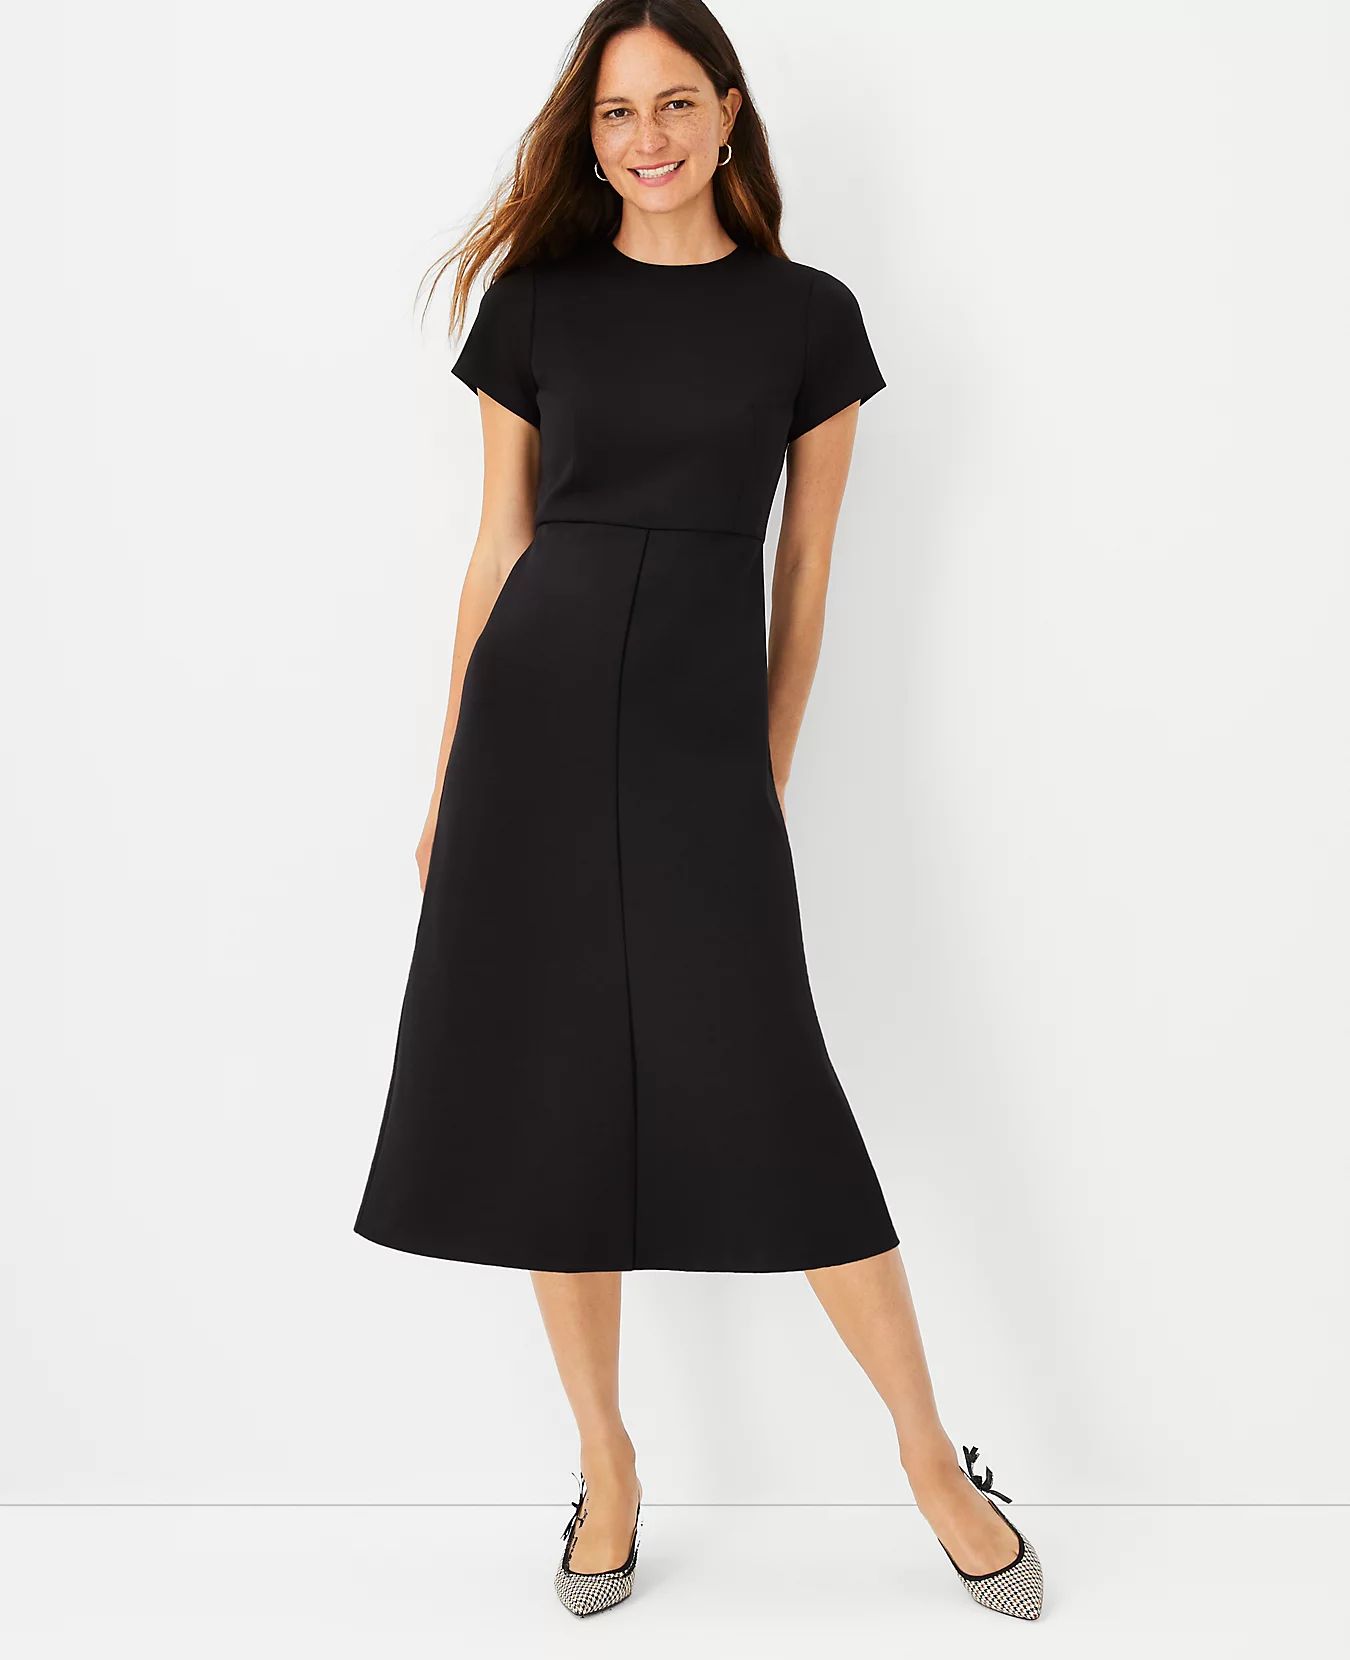 The Midi Flare Dress in Double Knit | Ann Taylor | Ann Taylor (US)